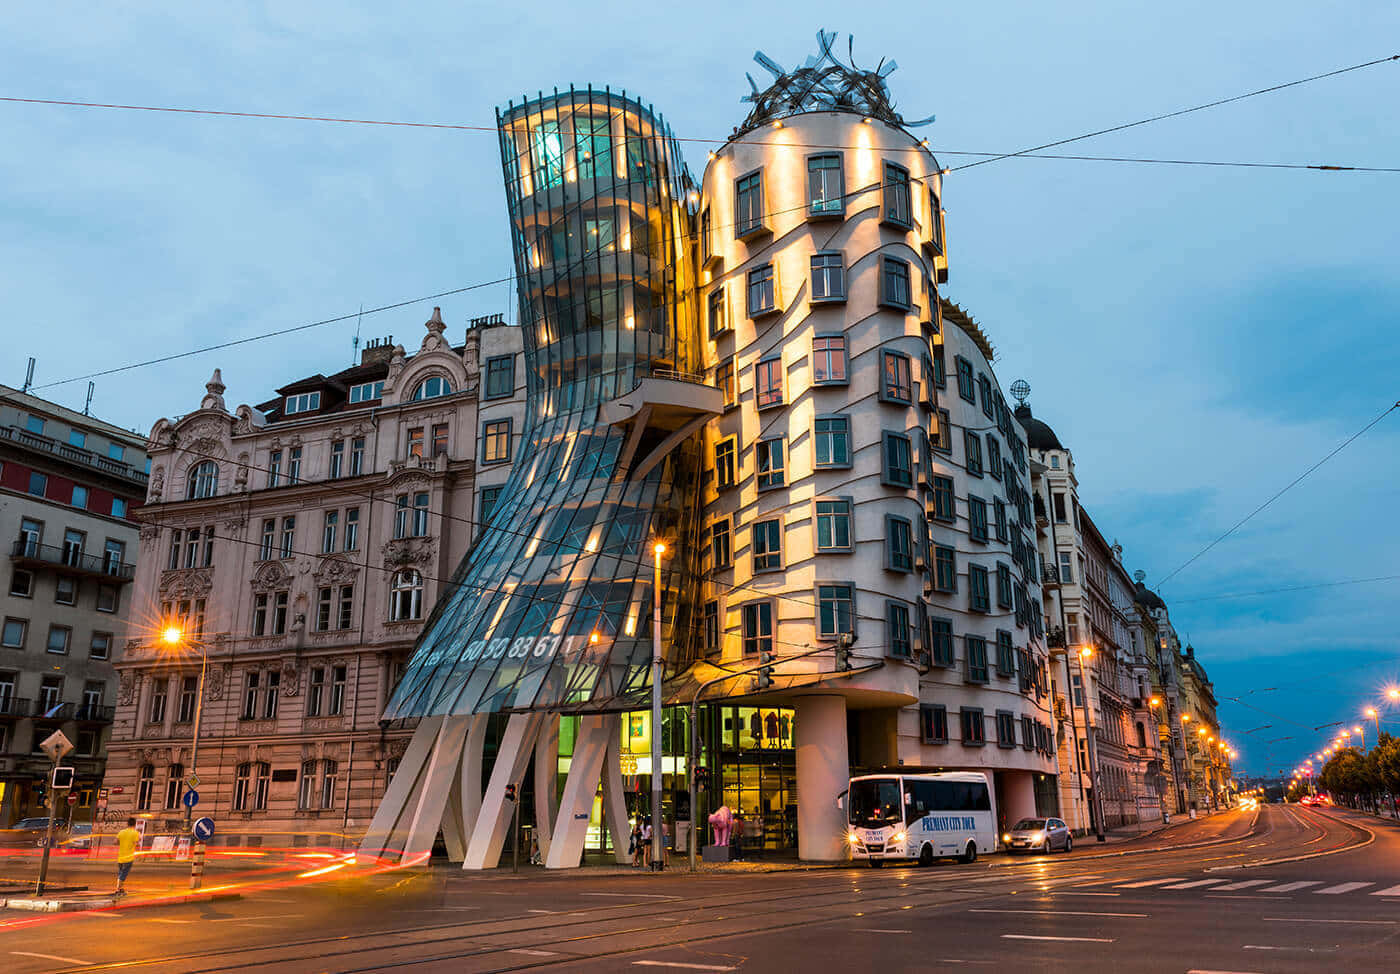 "Evening Glow At The Dancing House" Wallpaper